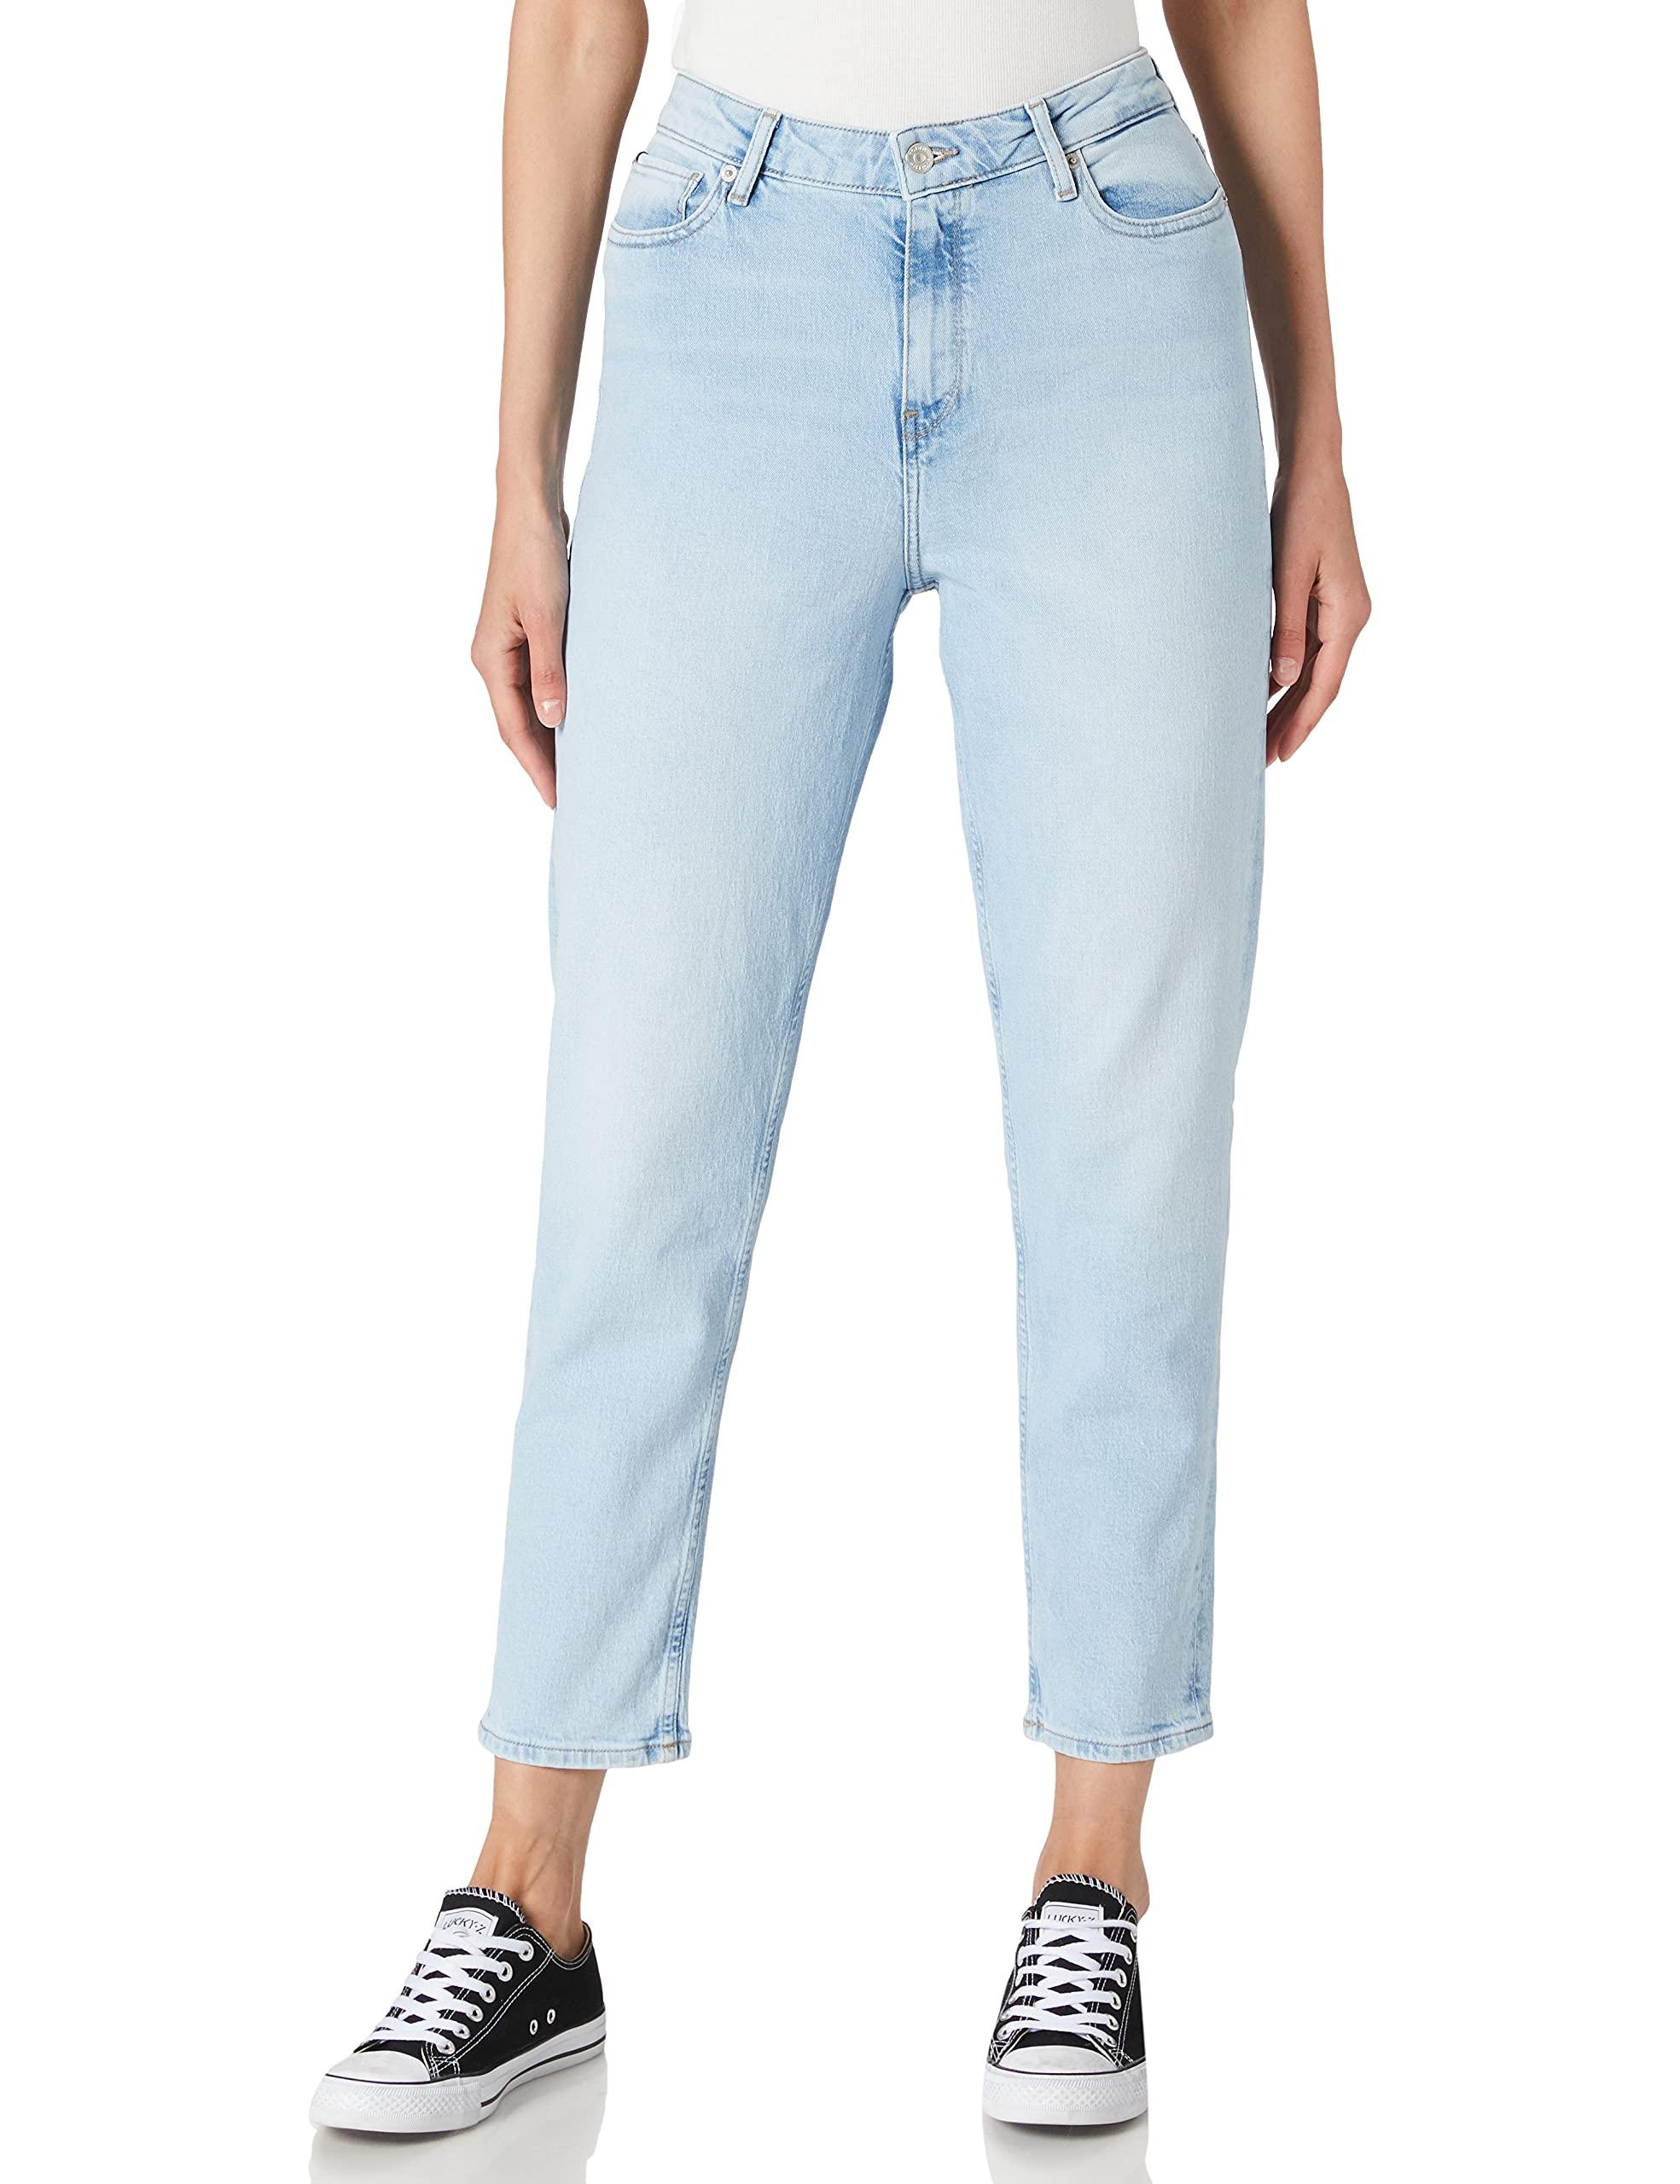 Tommy Hilfiger Gramercy Tapered Hw A Ola Pants in Blue - Lyst